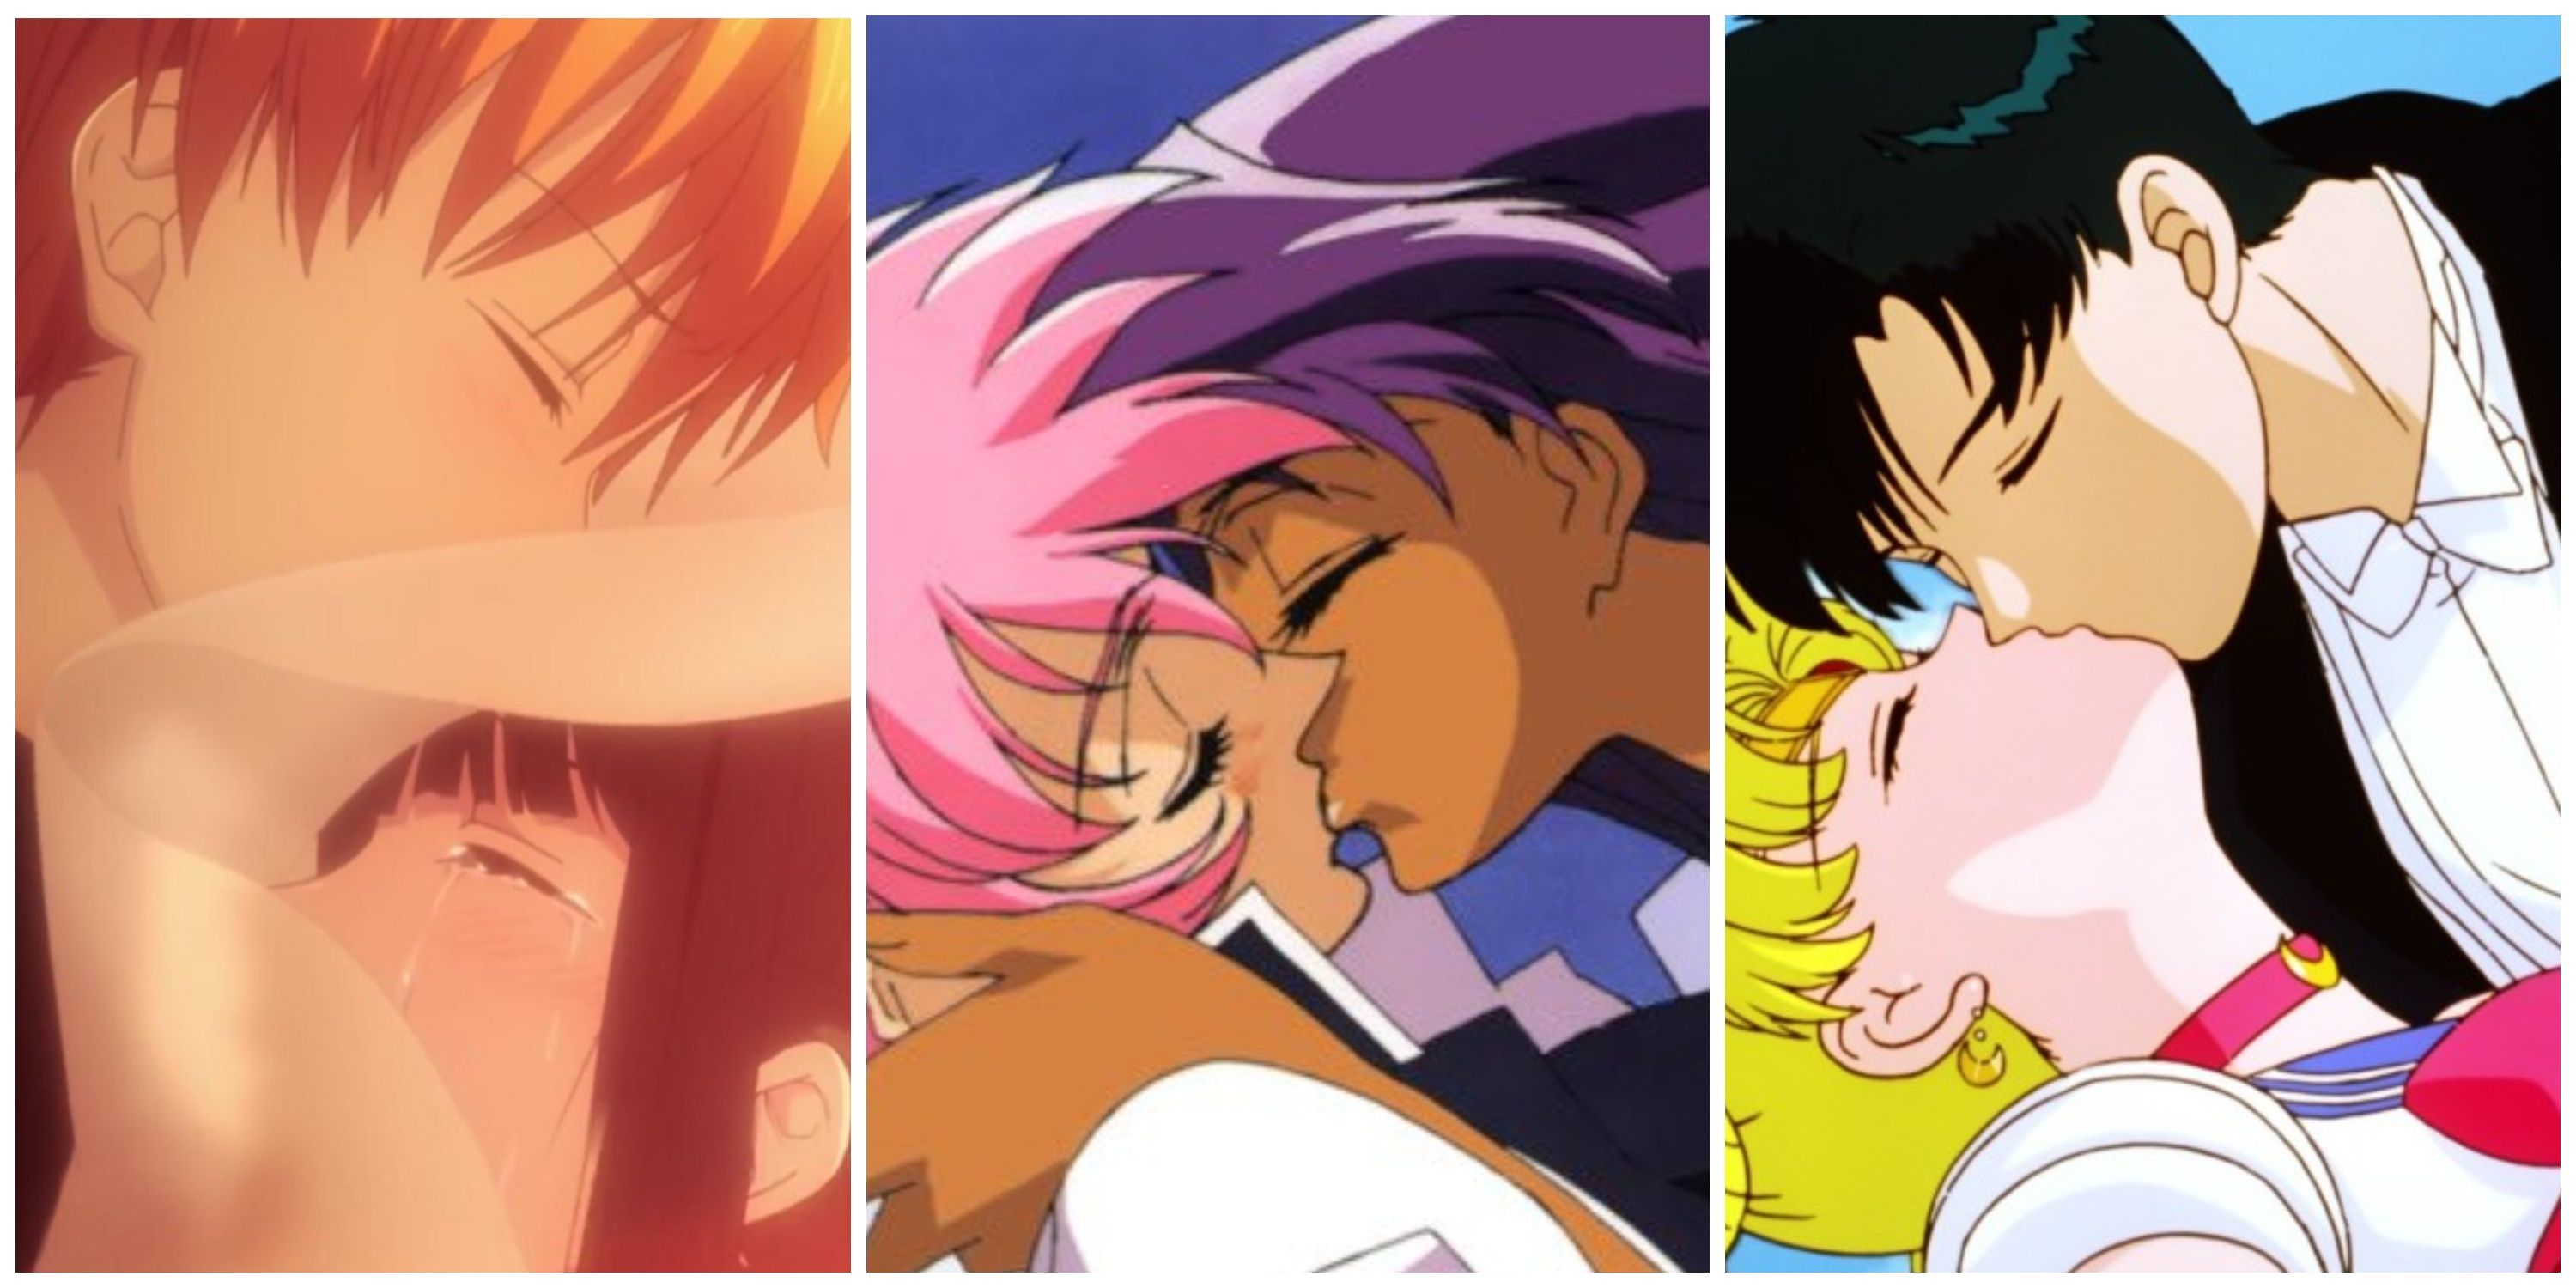 Split image, Kyo hugging Tohru through a curtain in Fruits Basket, Anthy and Utena kissing in Revolutionary Girl Utena Adolescence of Utena, Tuxedo Mask kissing Sailor Moon in Sailor Moon R: The Promise of the Rose